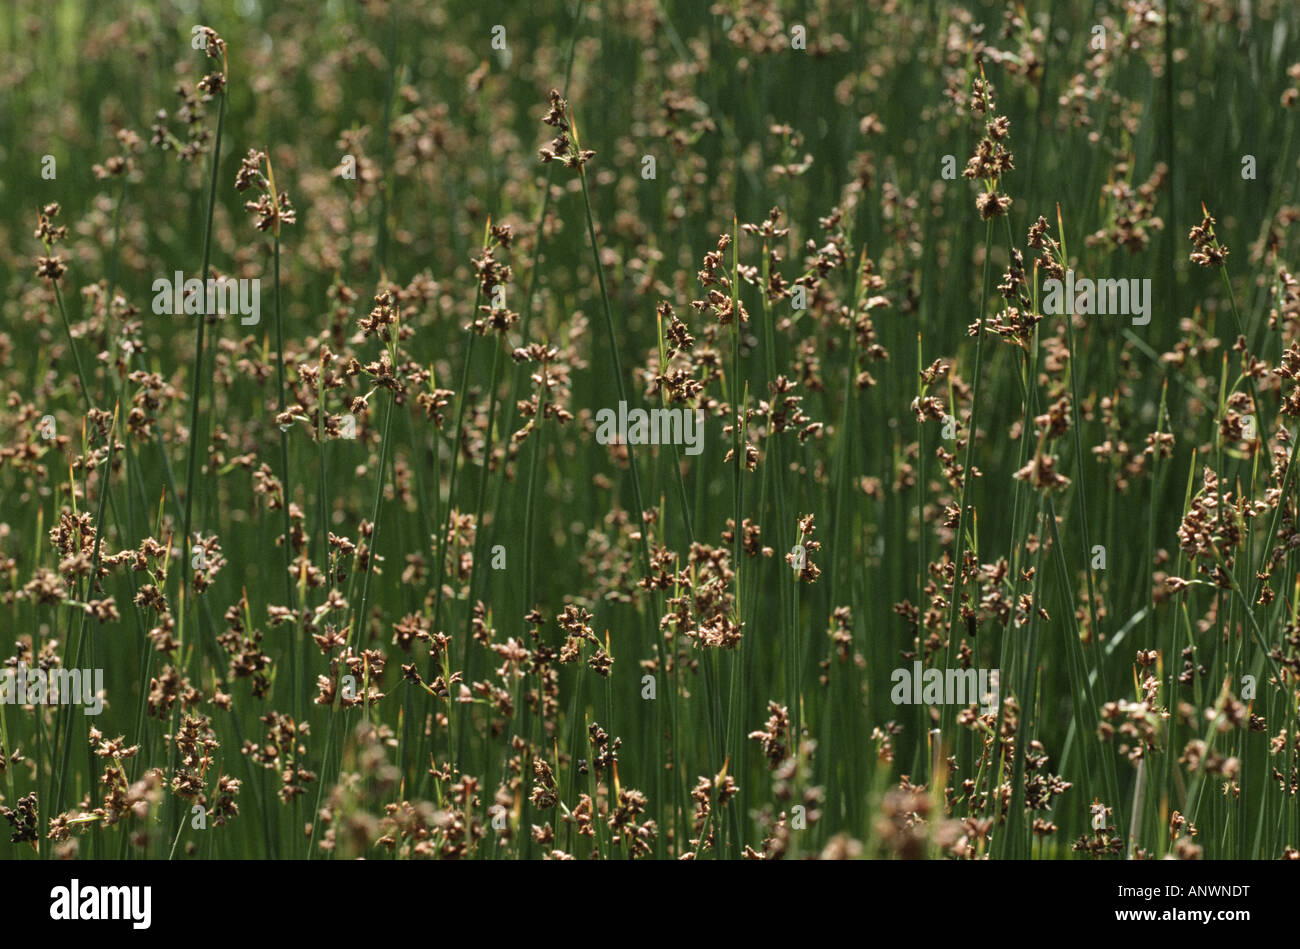 glaucous bulrush, grey club-rush, soft-stem club-rush (Schoenoplectus tabernaemontani), reed bed with blooming plants Stock Photo